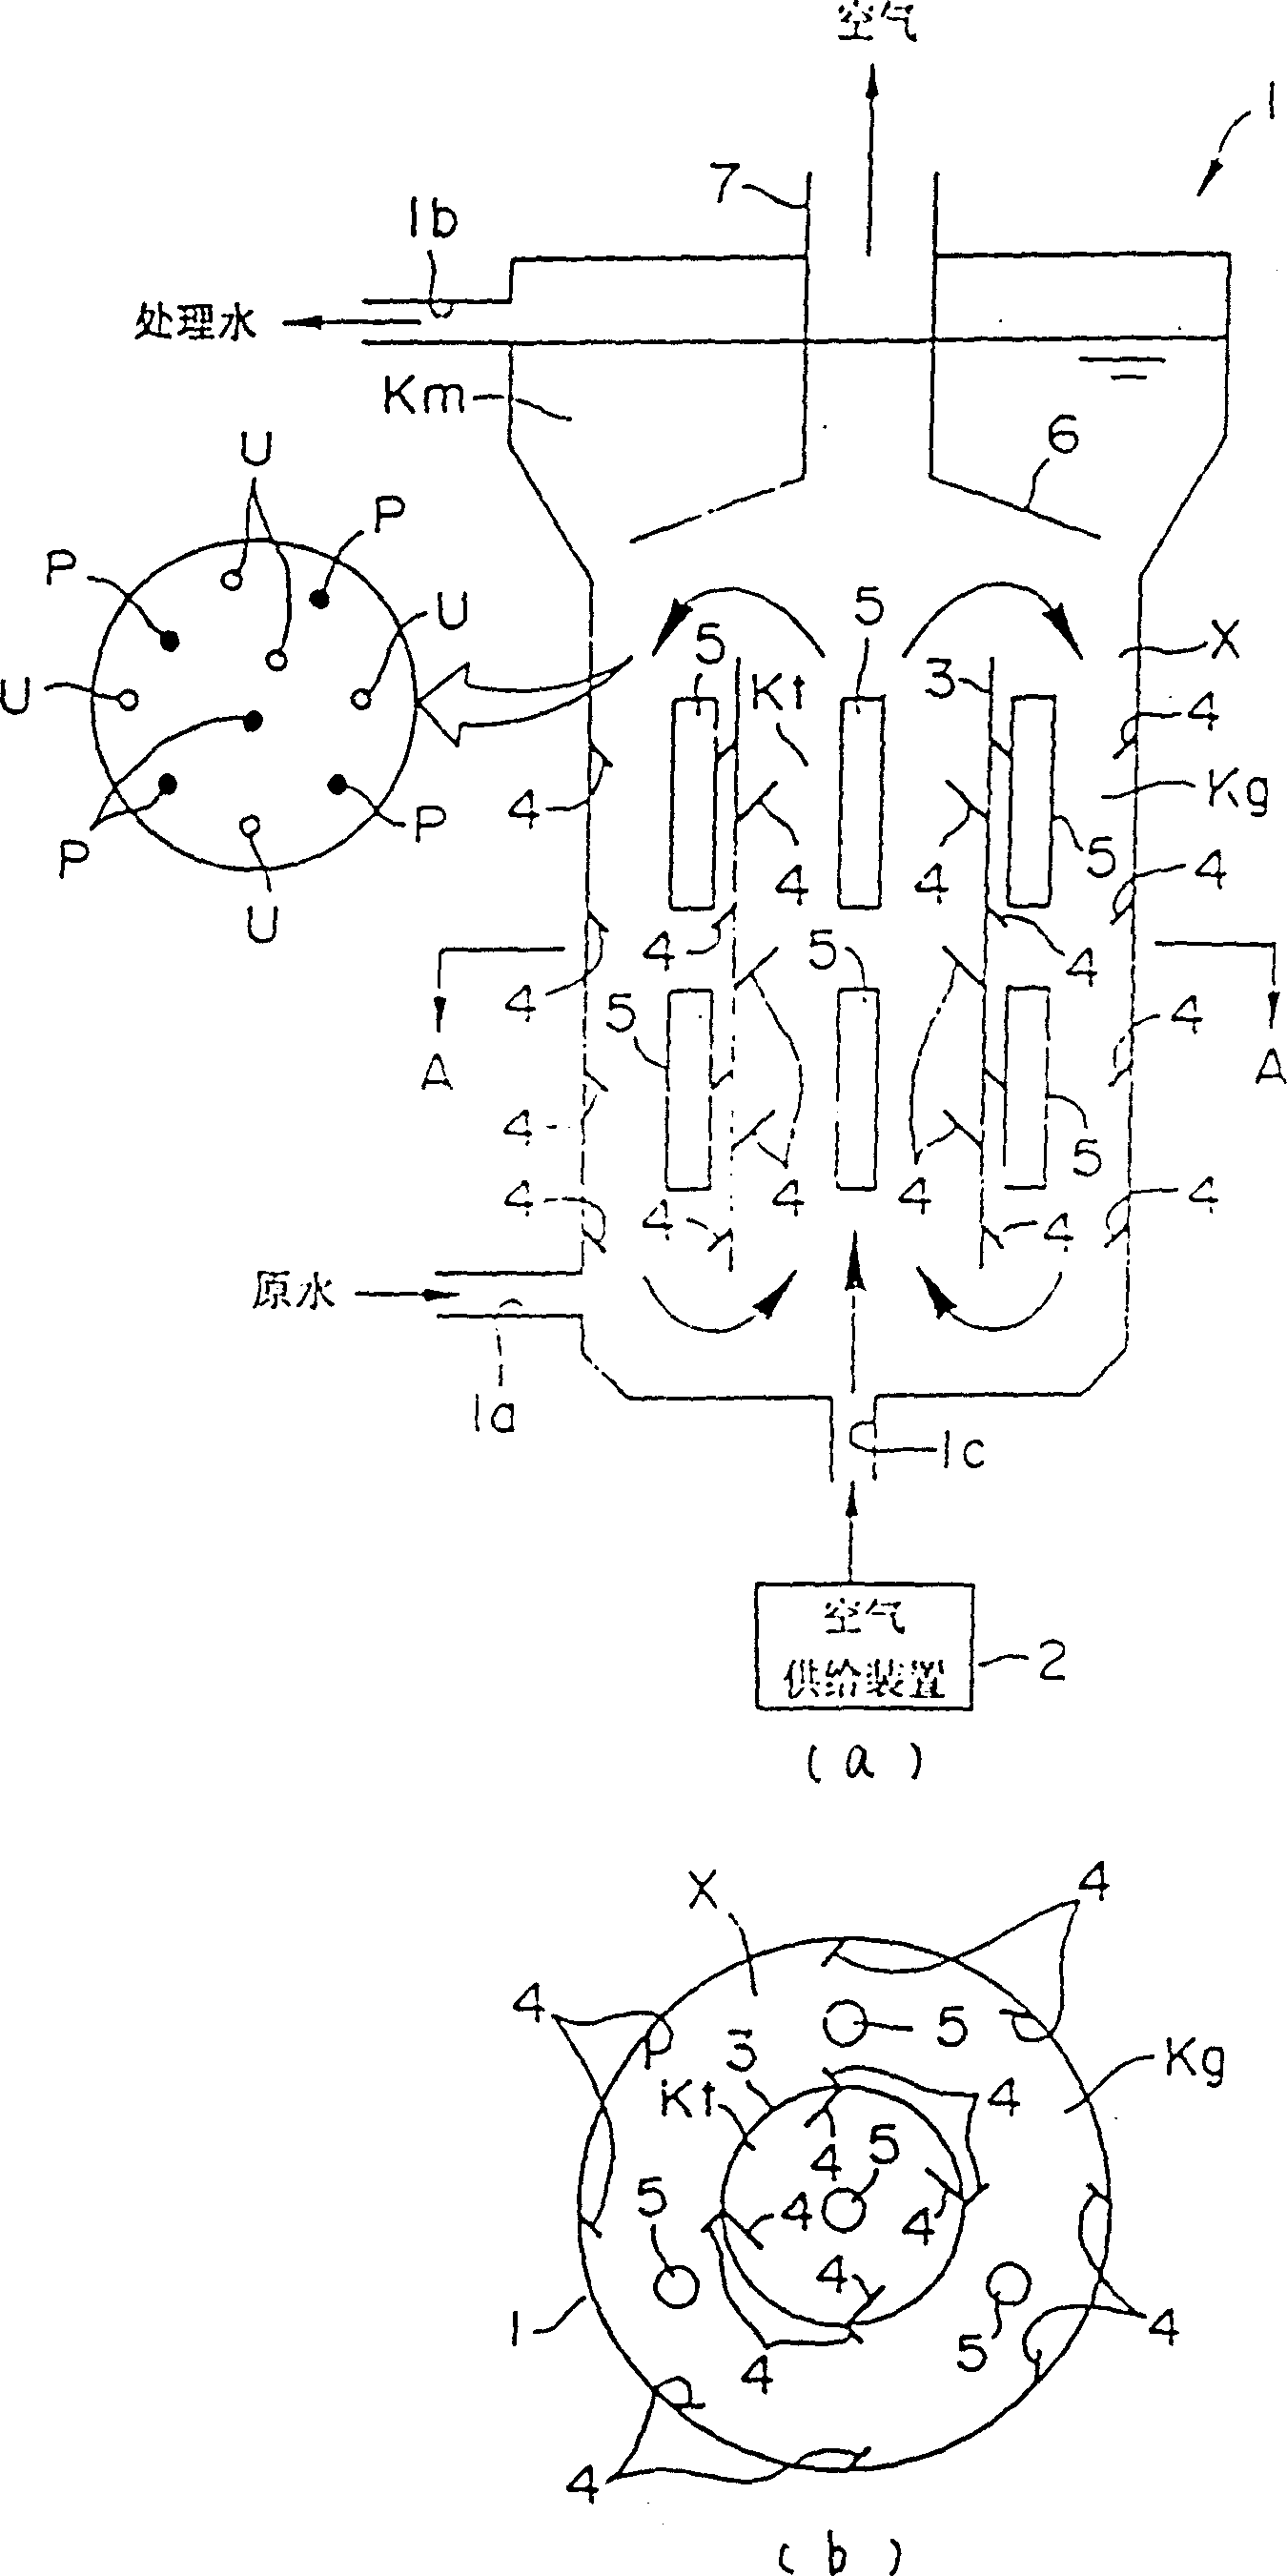 Process and device for treating water by fluidized bed type suspension and photocatalytic oxidization in built-in depositing separation area